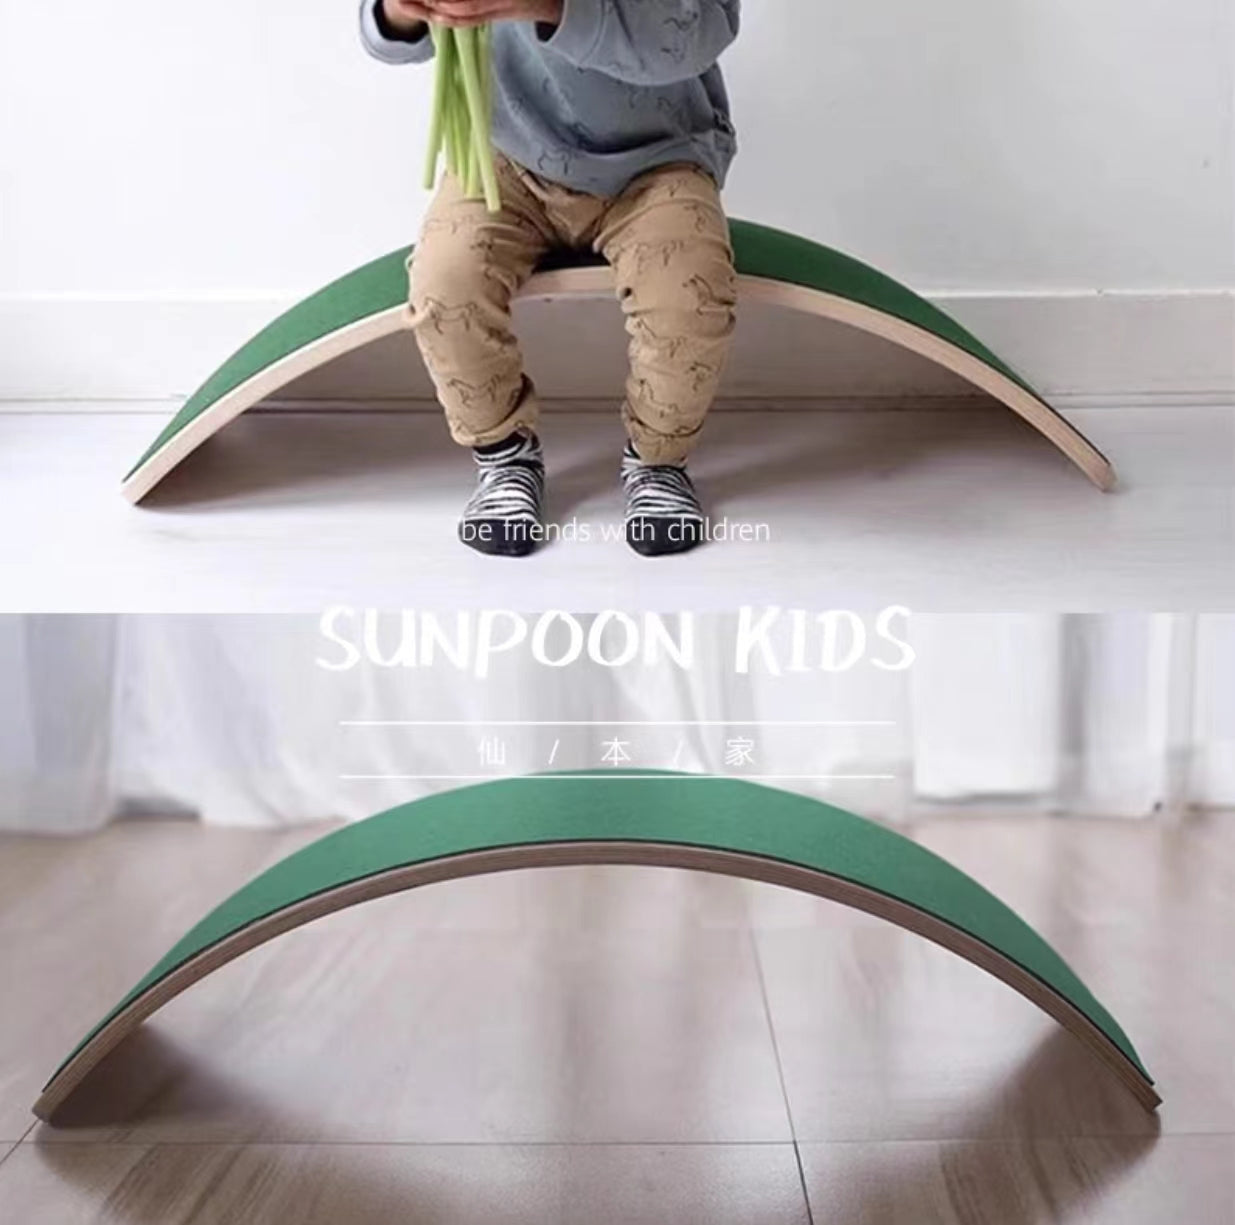 Arched Plywood Wobble Balance Board - 4 Seasons Home Gadgets